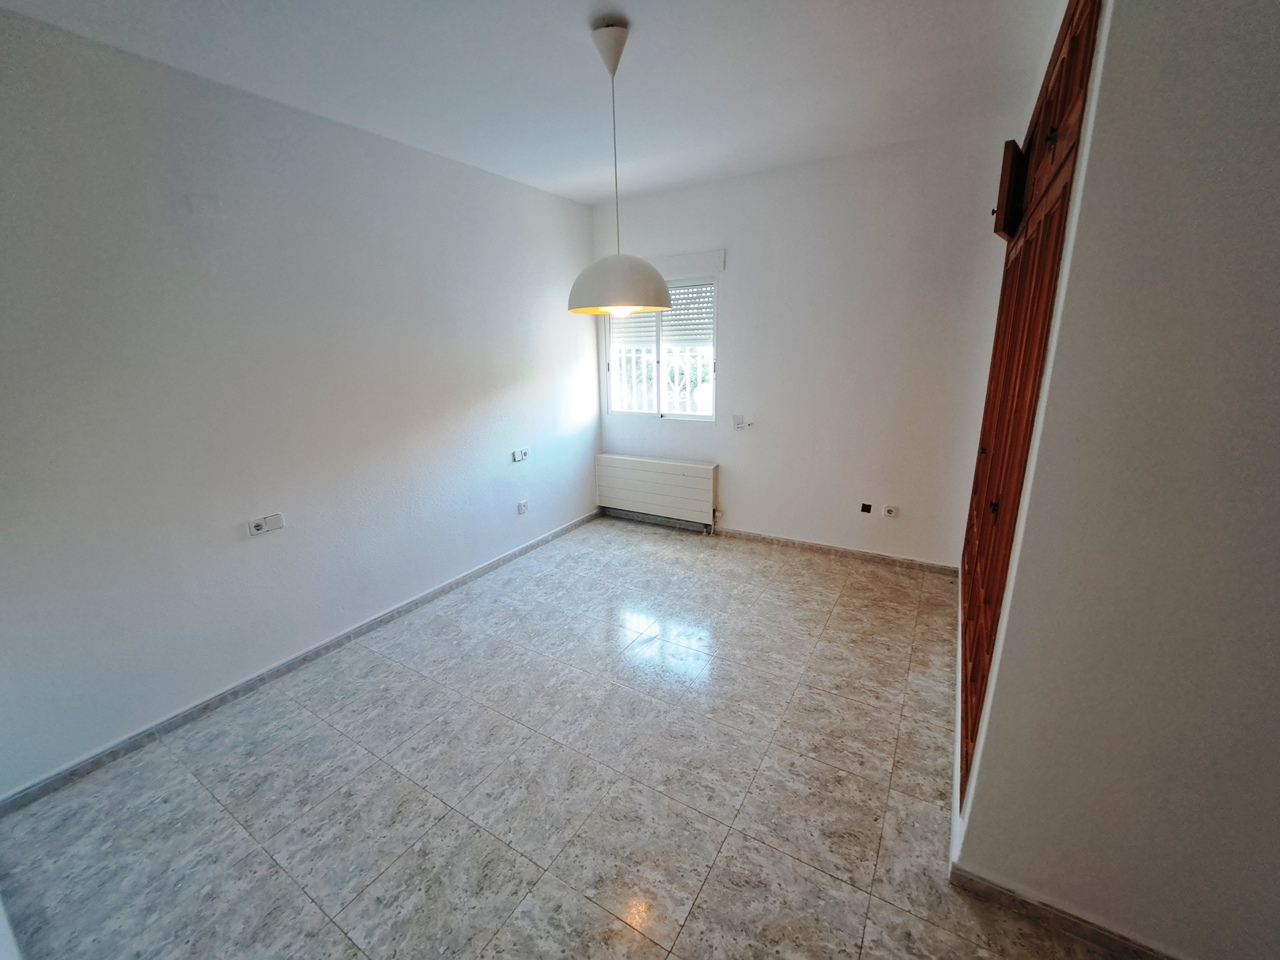 INDEPENDENT VILLA IN A VERY GOOD AREA OF ALBIR